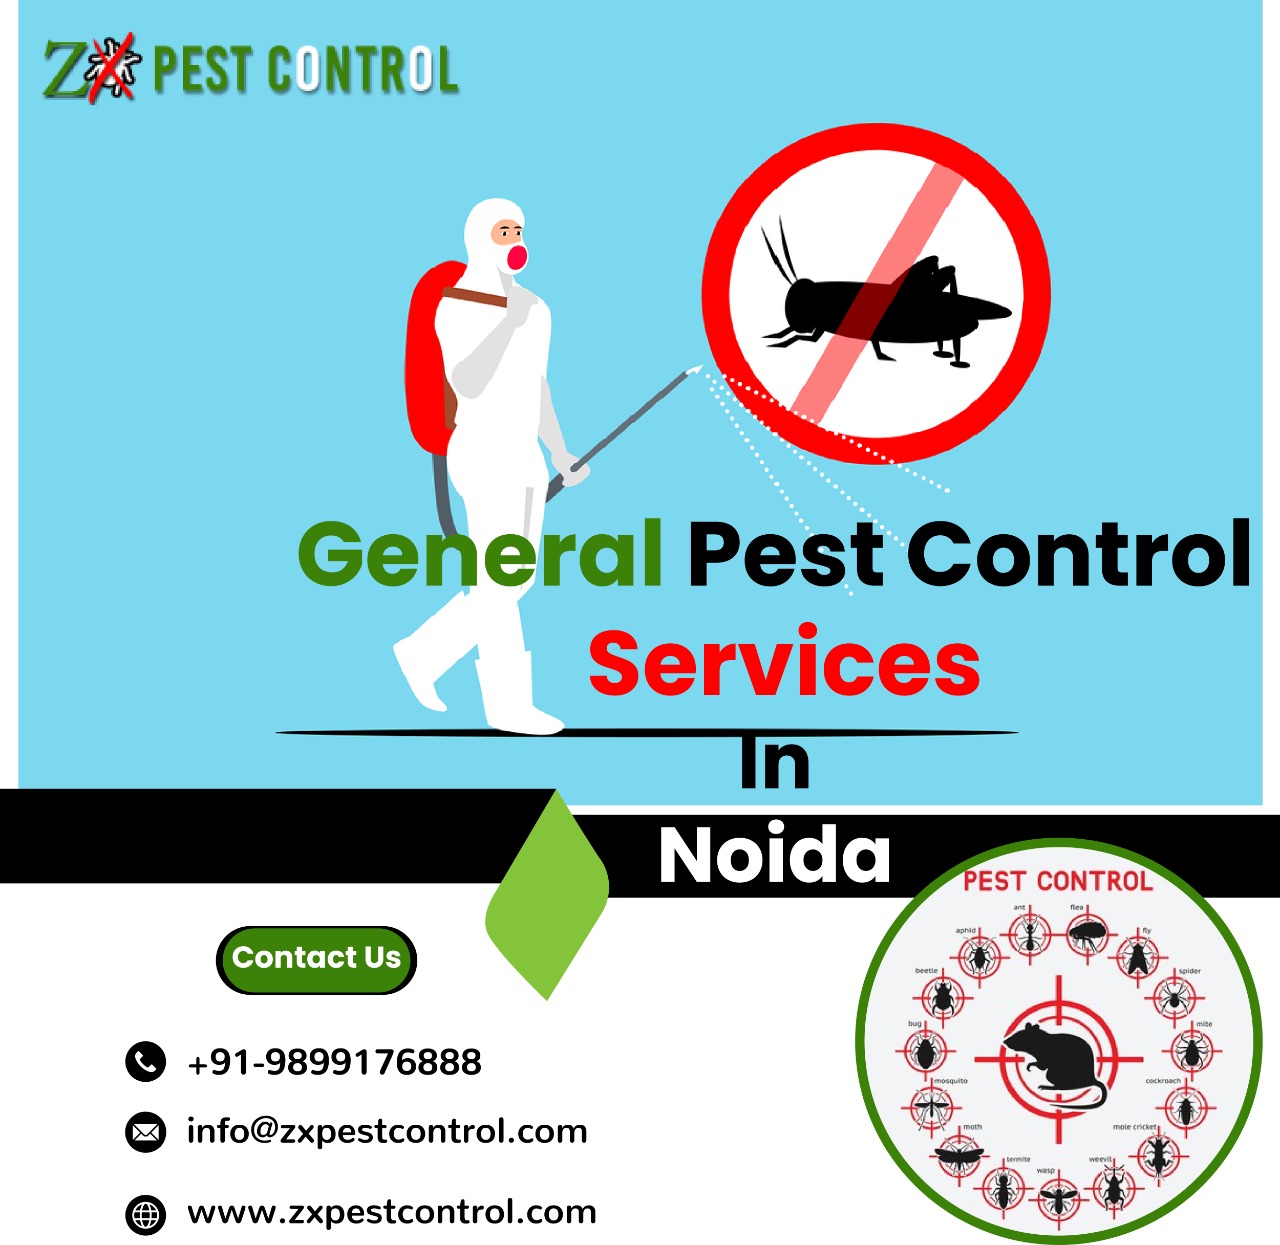 Get Our Services in Noida to Keep Your Home Pest-Free